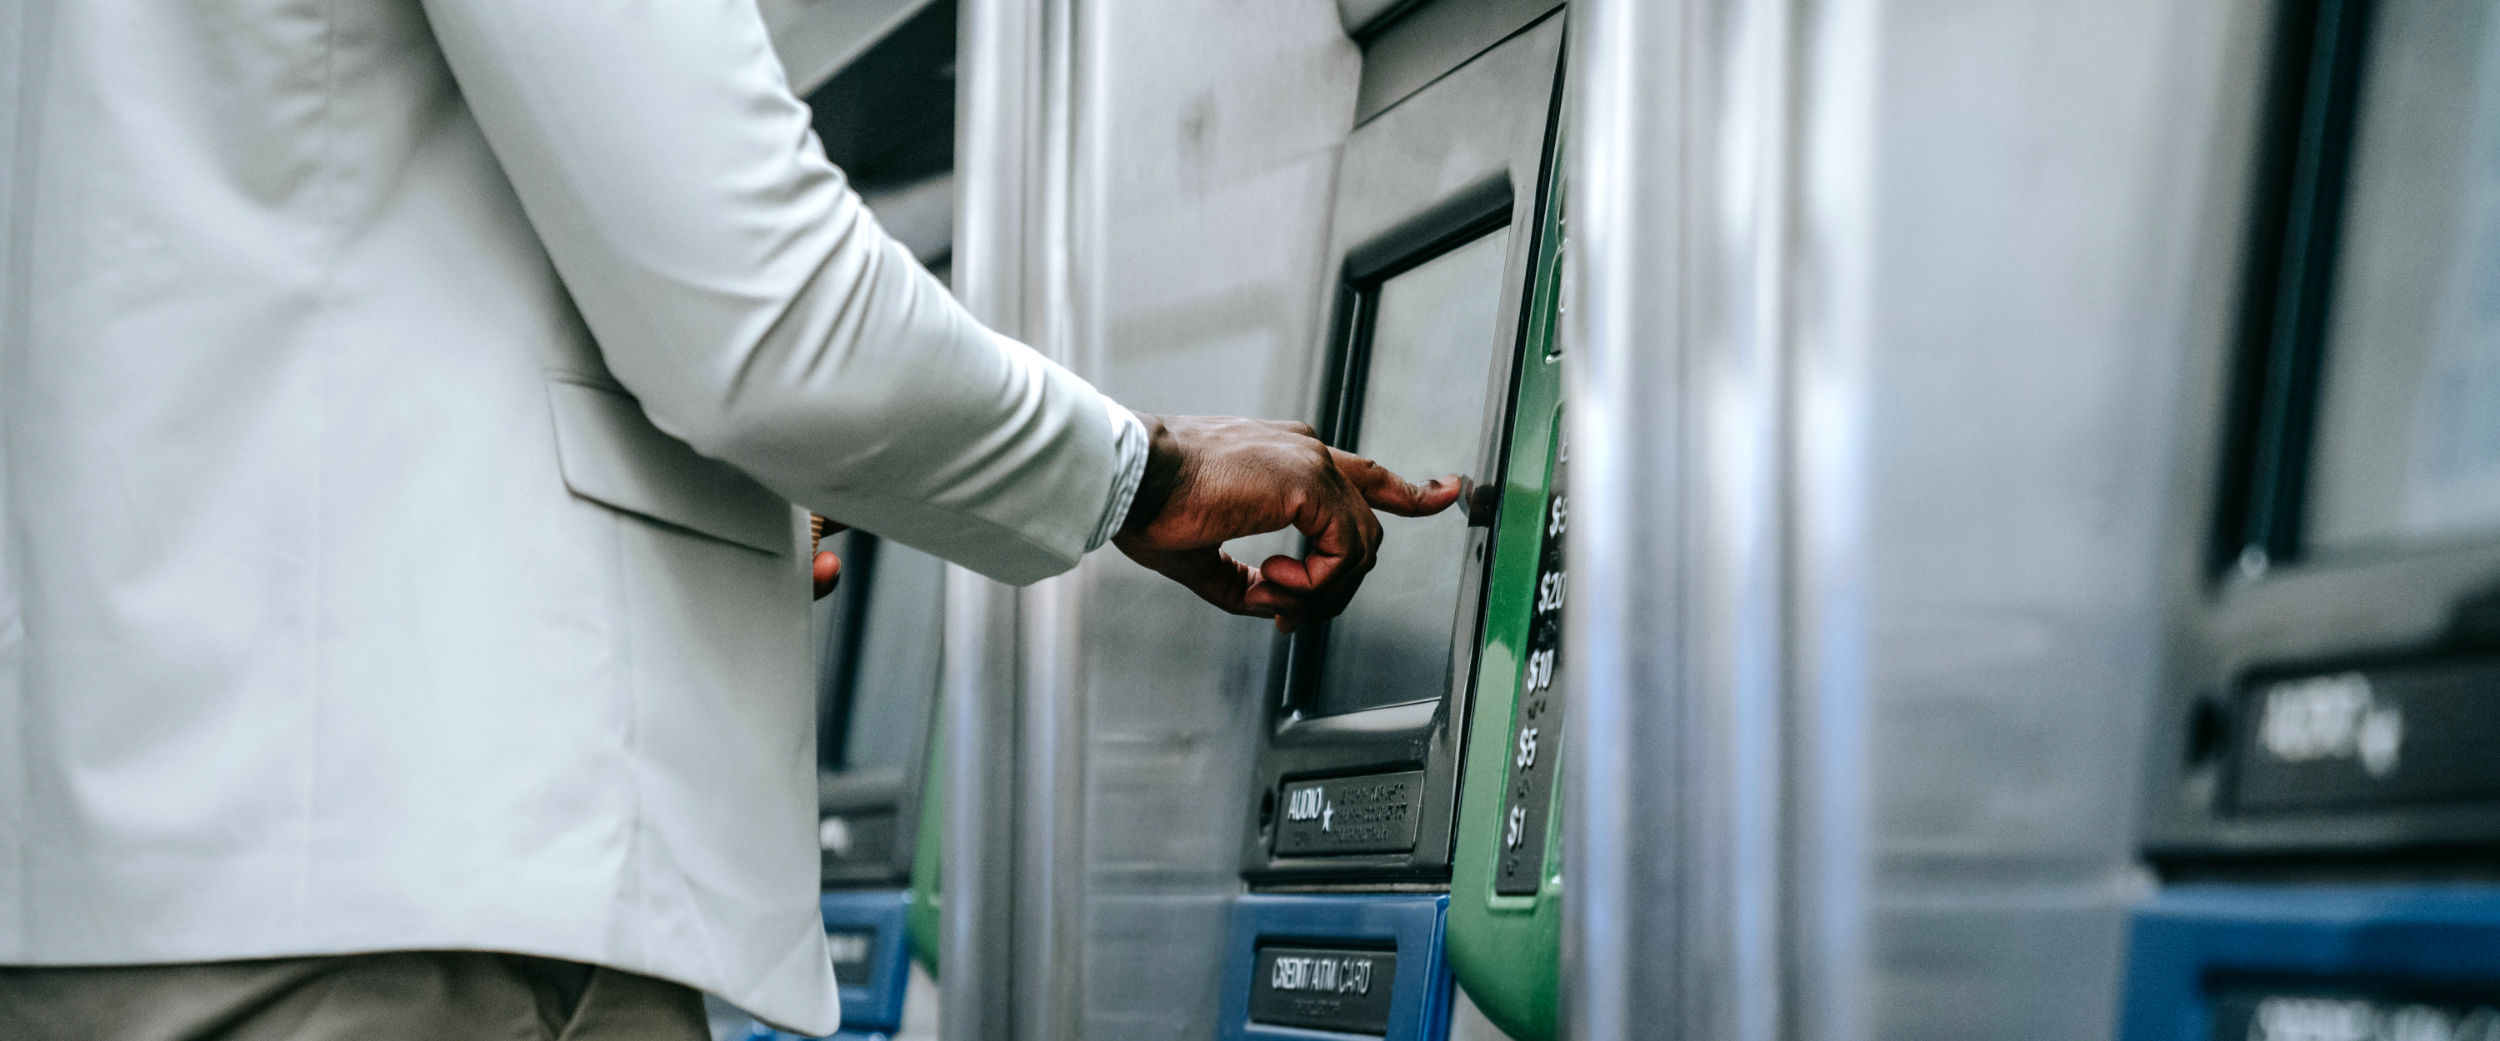 A man presses on the screen of a ticket machine with his finger.